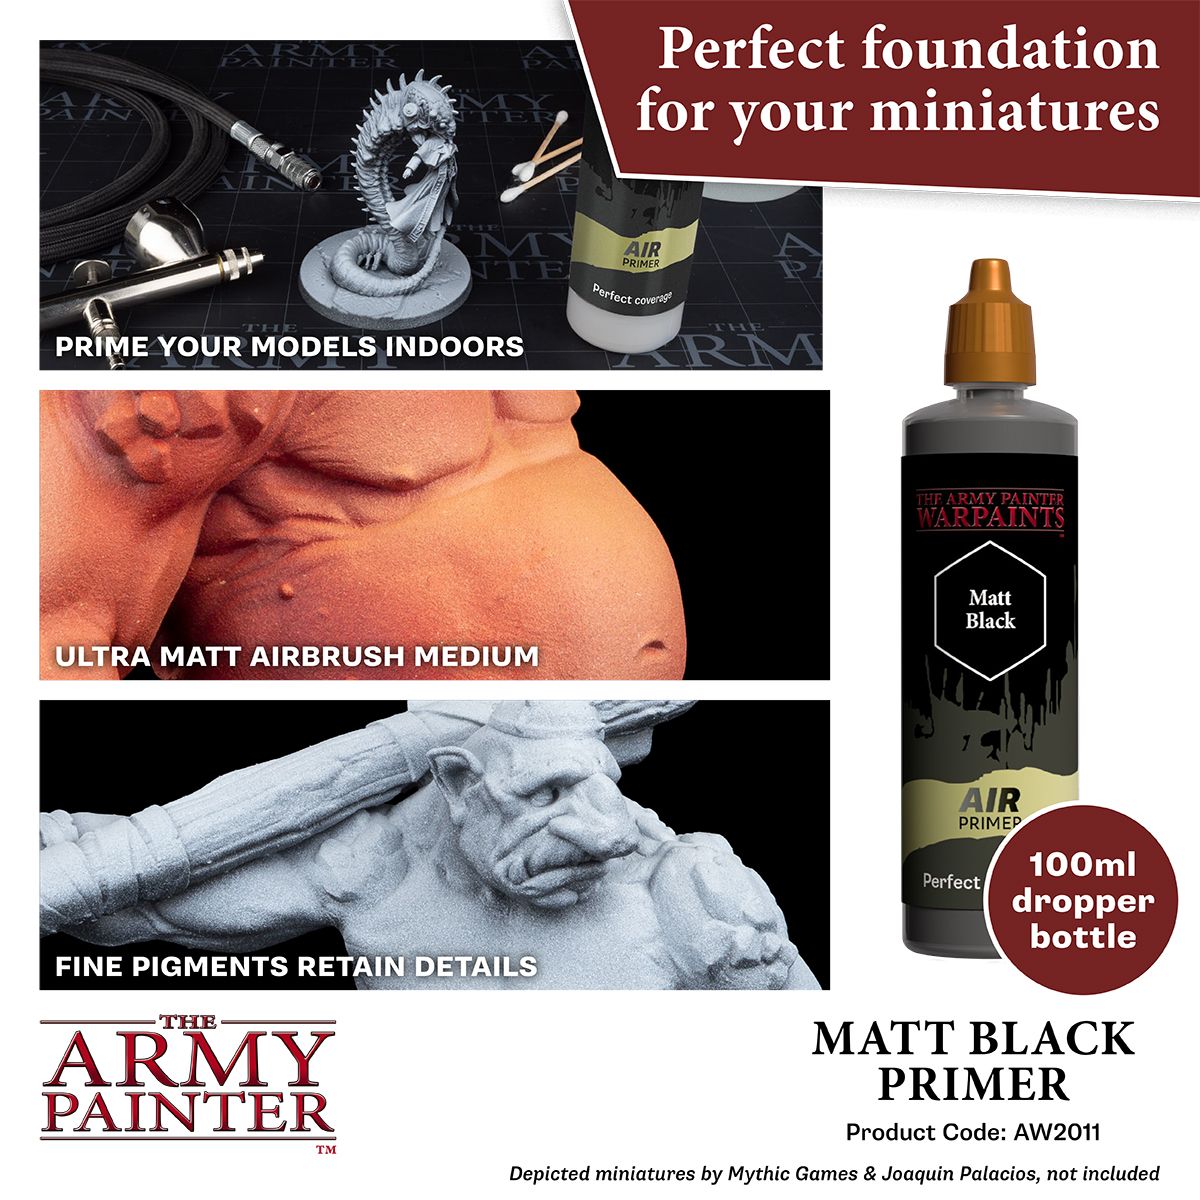 The Army Painter - Warpaints Air: Airbrush Primer Bundle (3x100 ml) –  Wargames Delivered